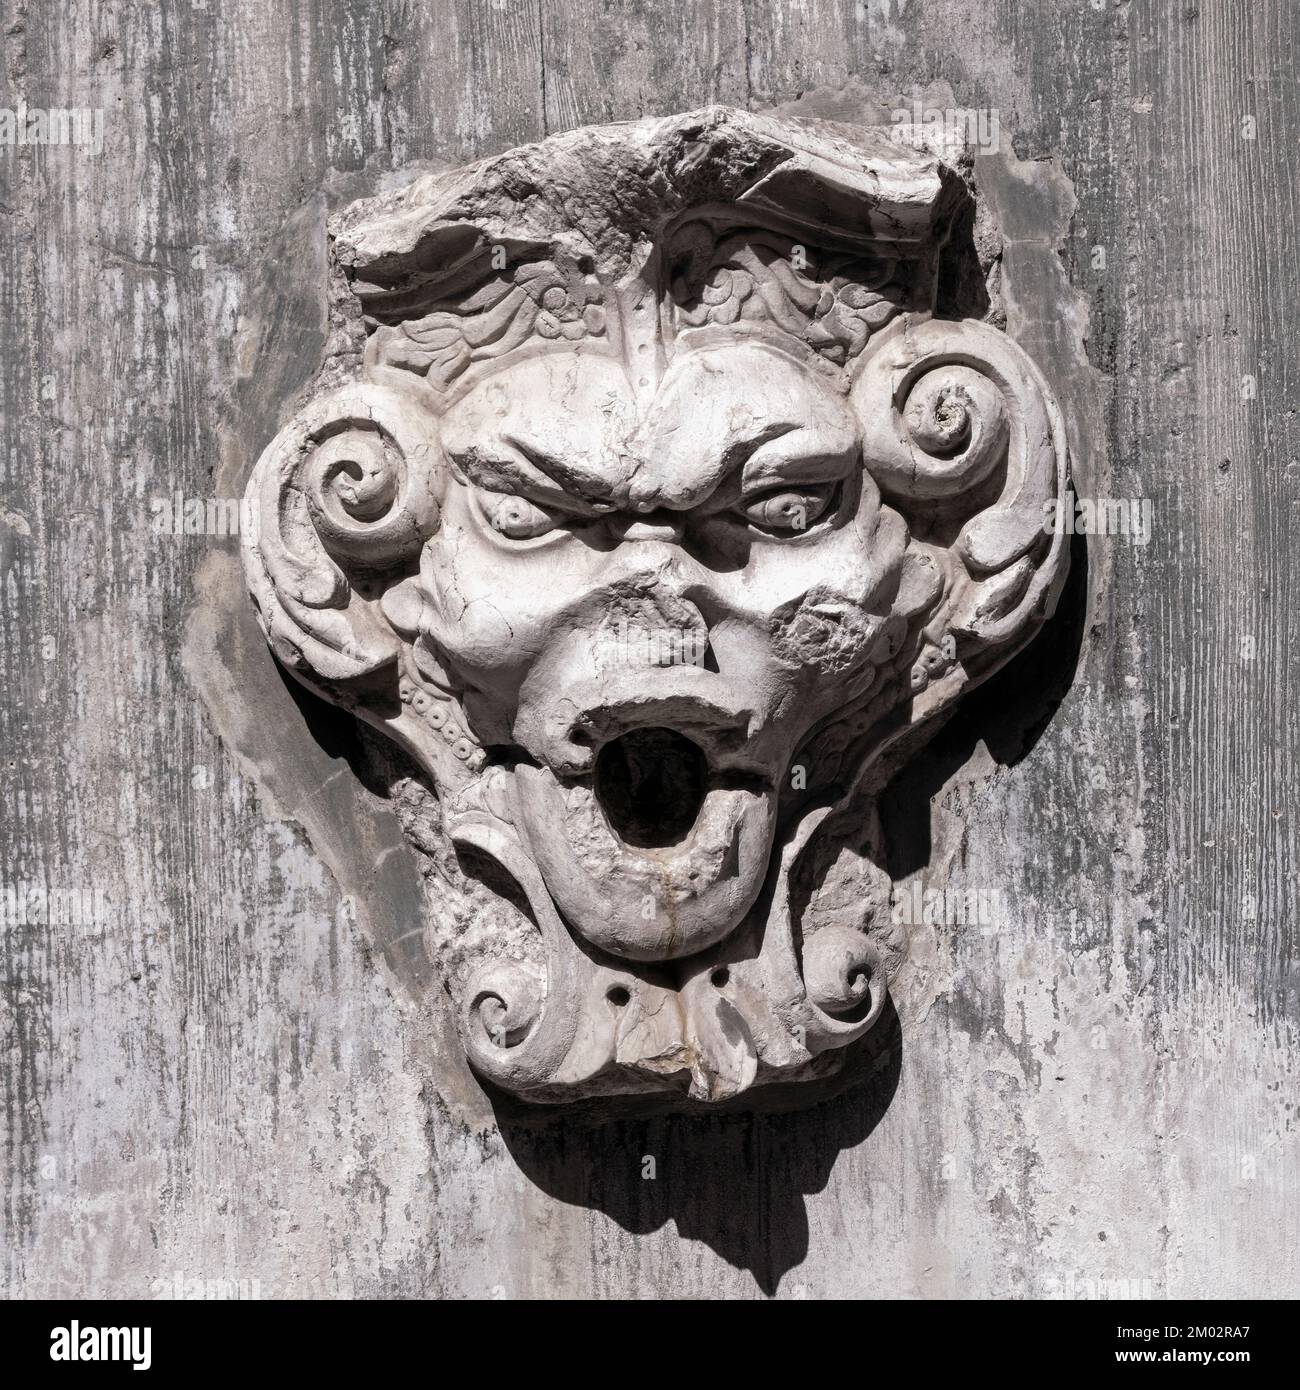 Grotesque face on a water fountain in the gardens of St George's castle, Lisbon, Portugal. Stock Photo